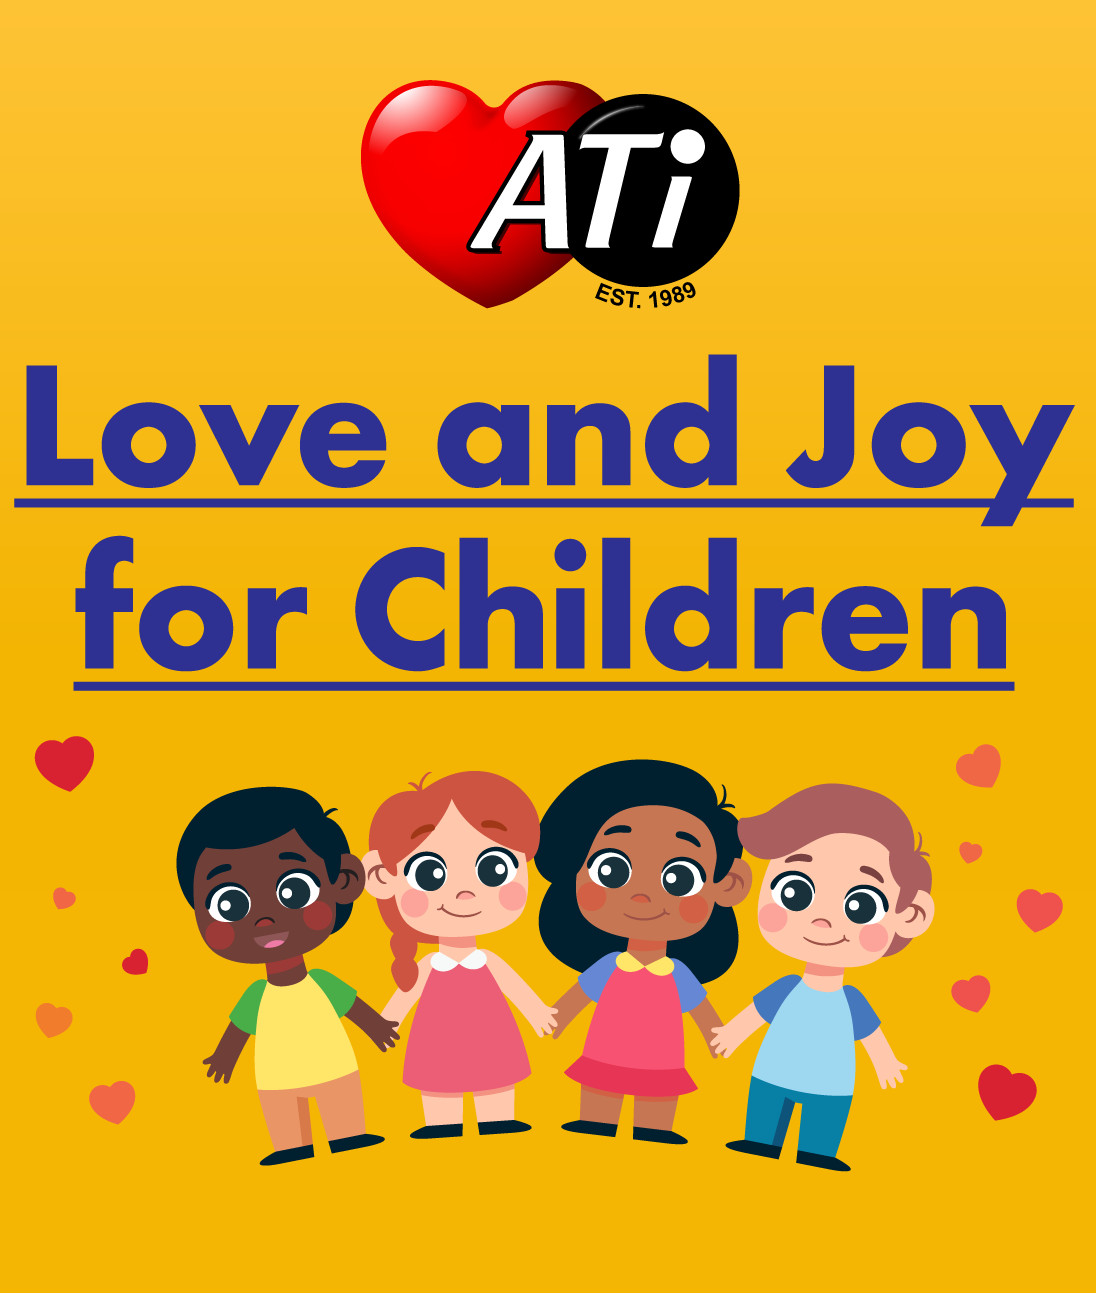 Image for LIVE - Love and Joy for Children